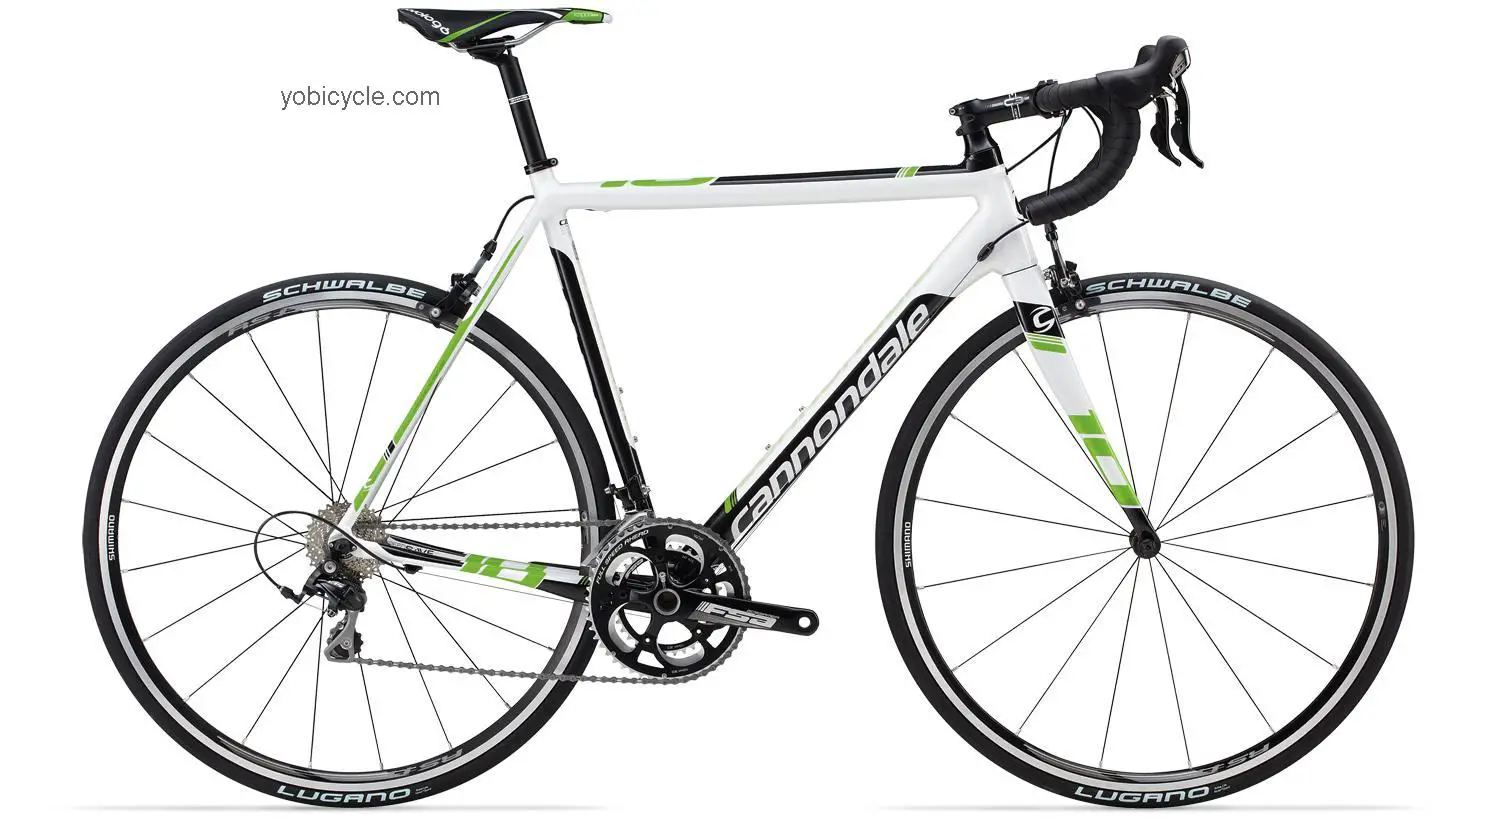 Cannondale CAAD10 5 105 Double 2014 comparison online with competitors